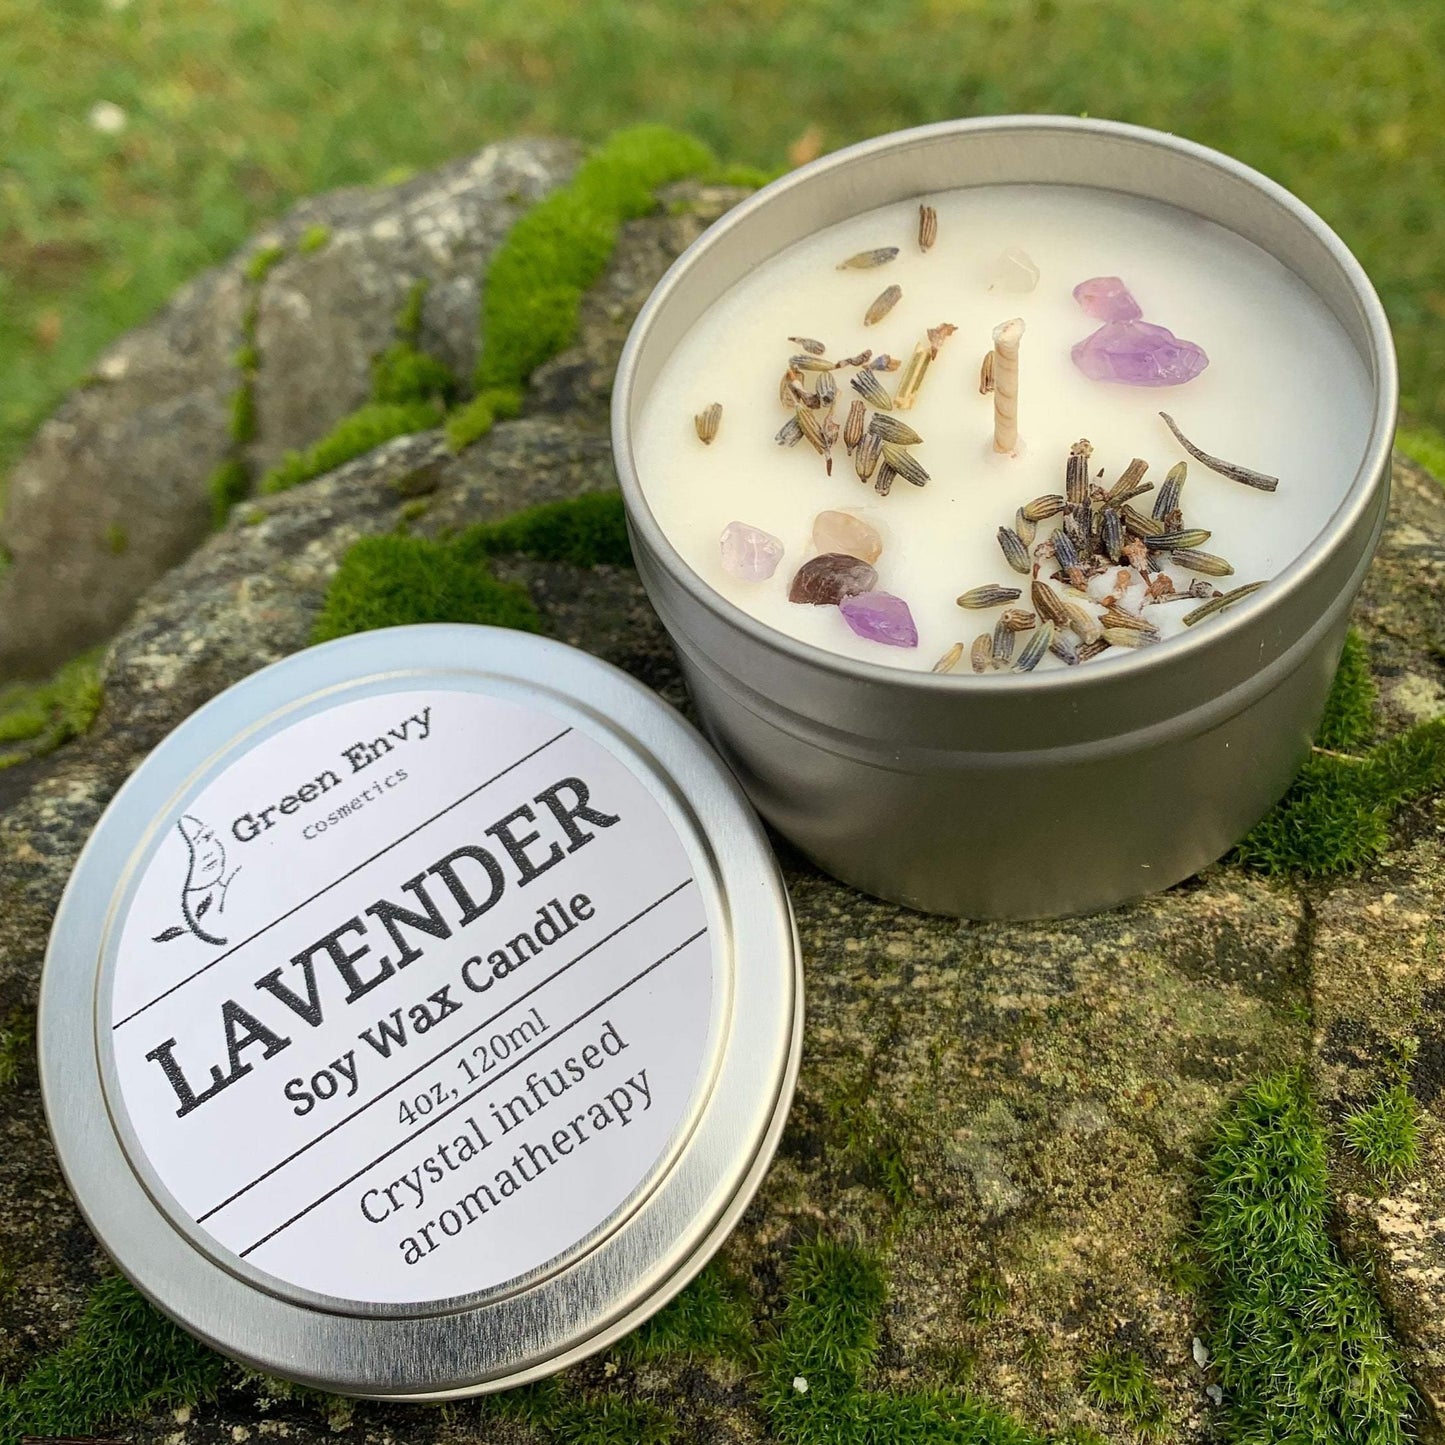 LAVENDER- CRYSTAL INFUSED AROMATHERAPY CANDLE - GreenEnvyCosmetics 